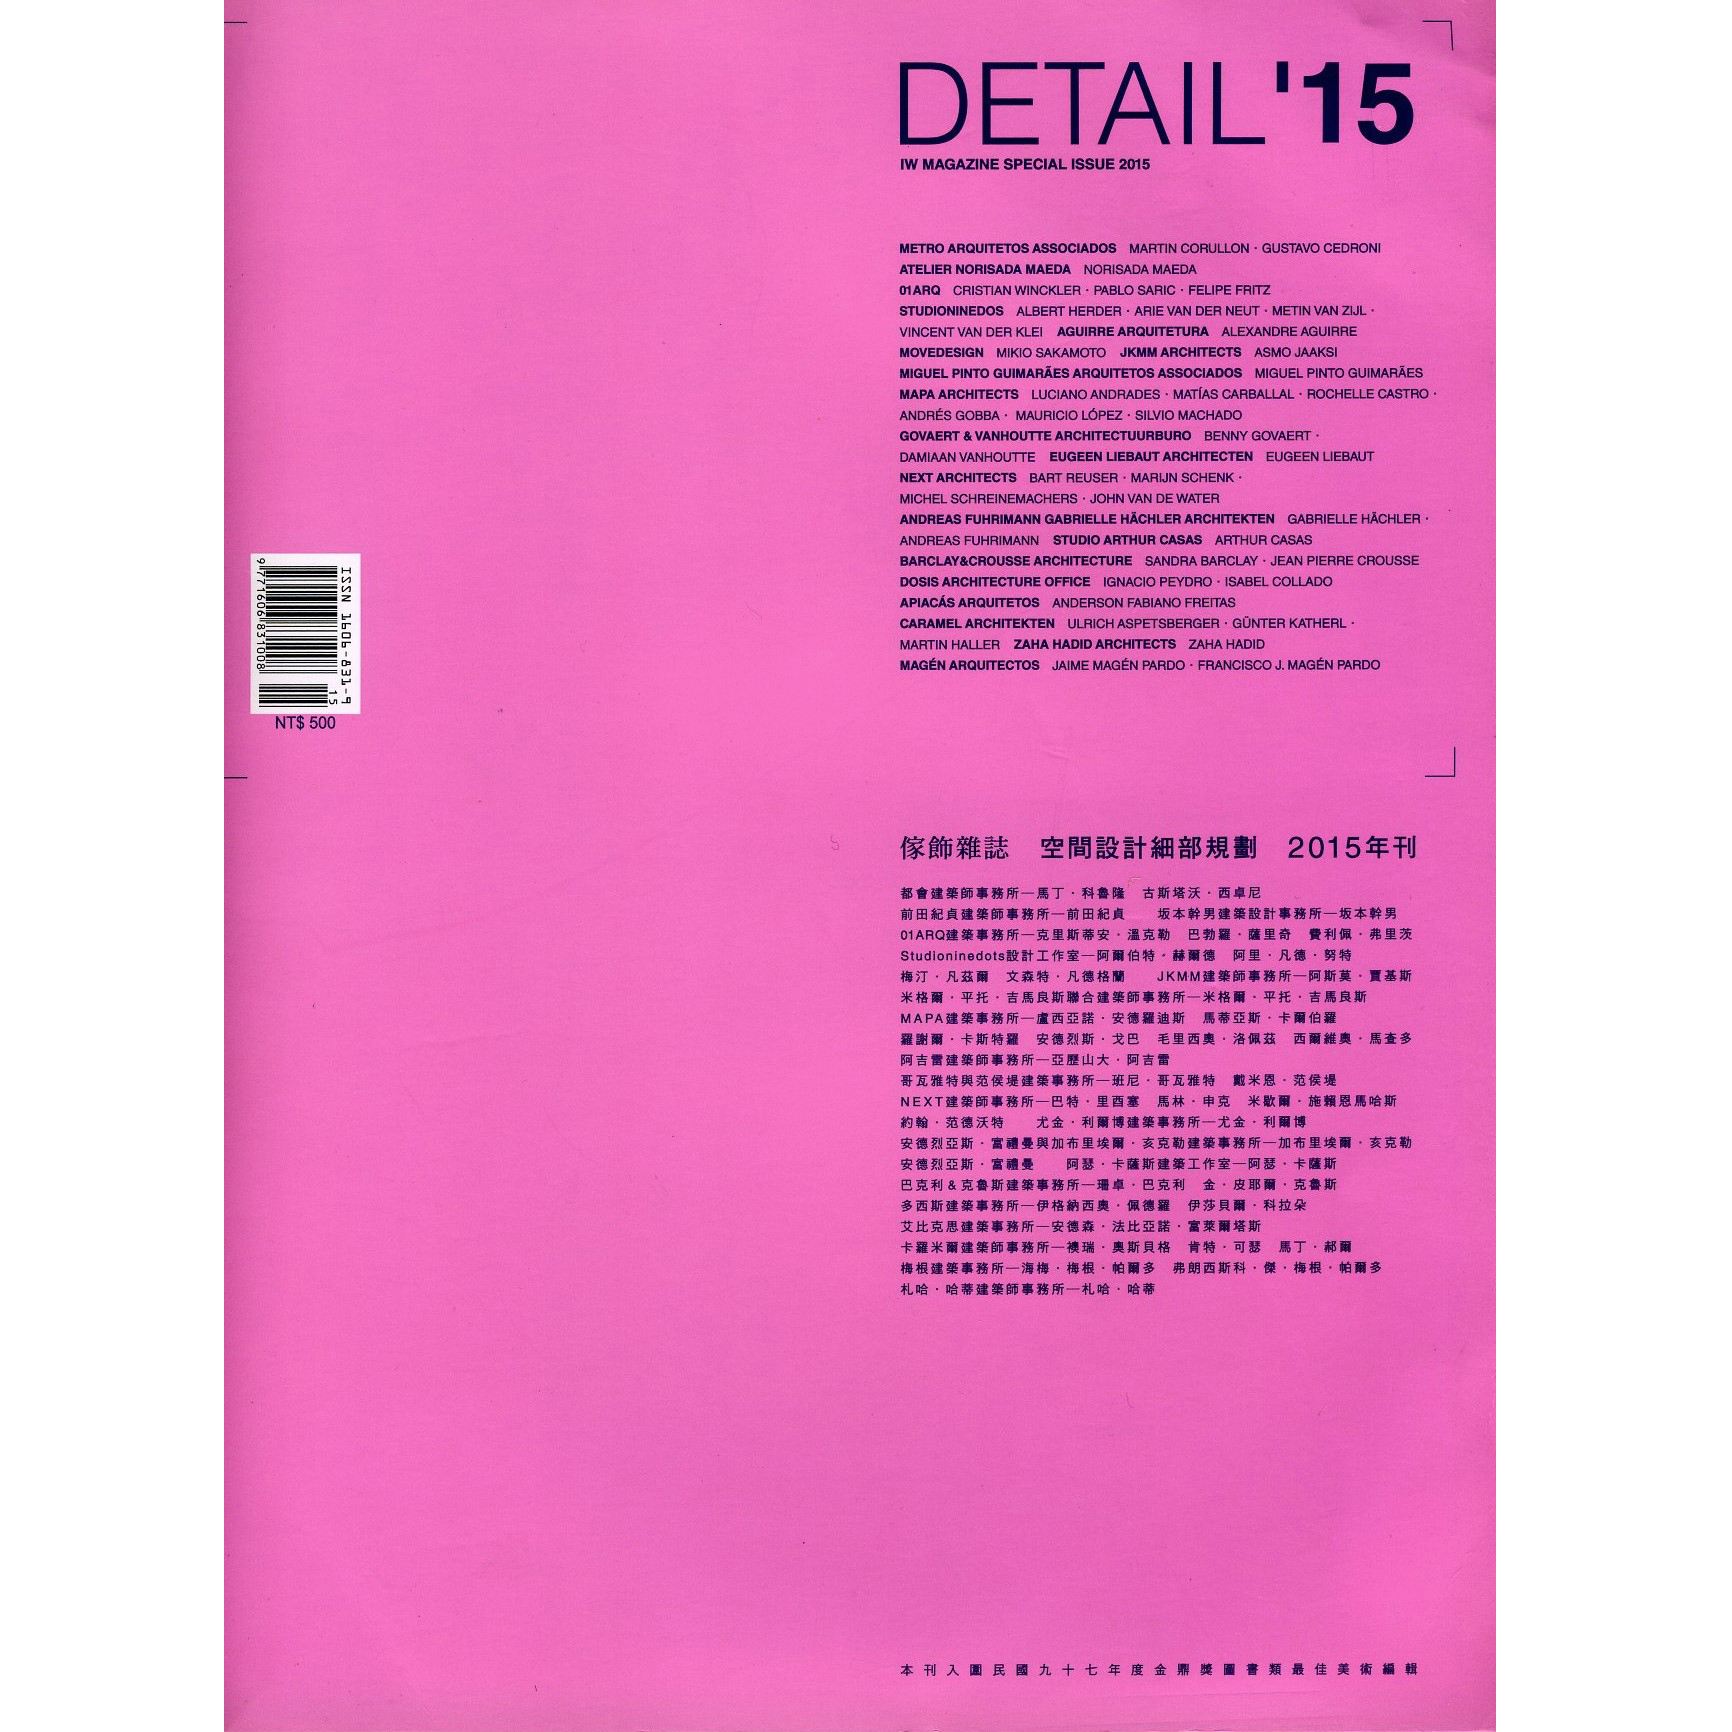 IW Detail'15. 2015 (Printed Publication)